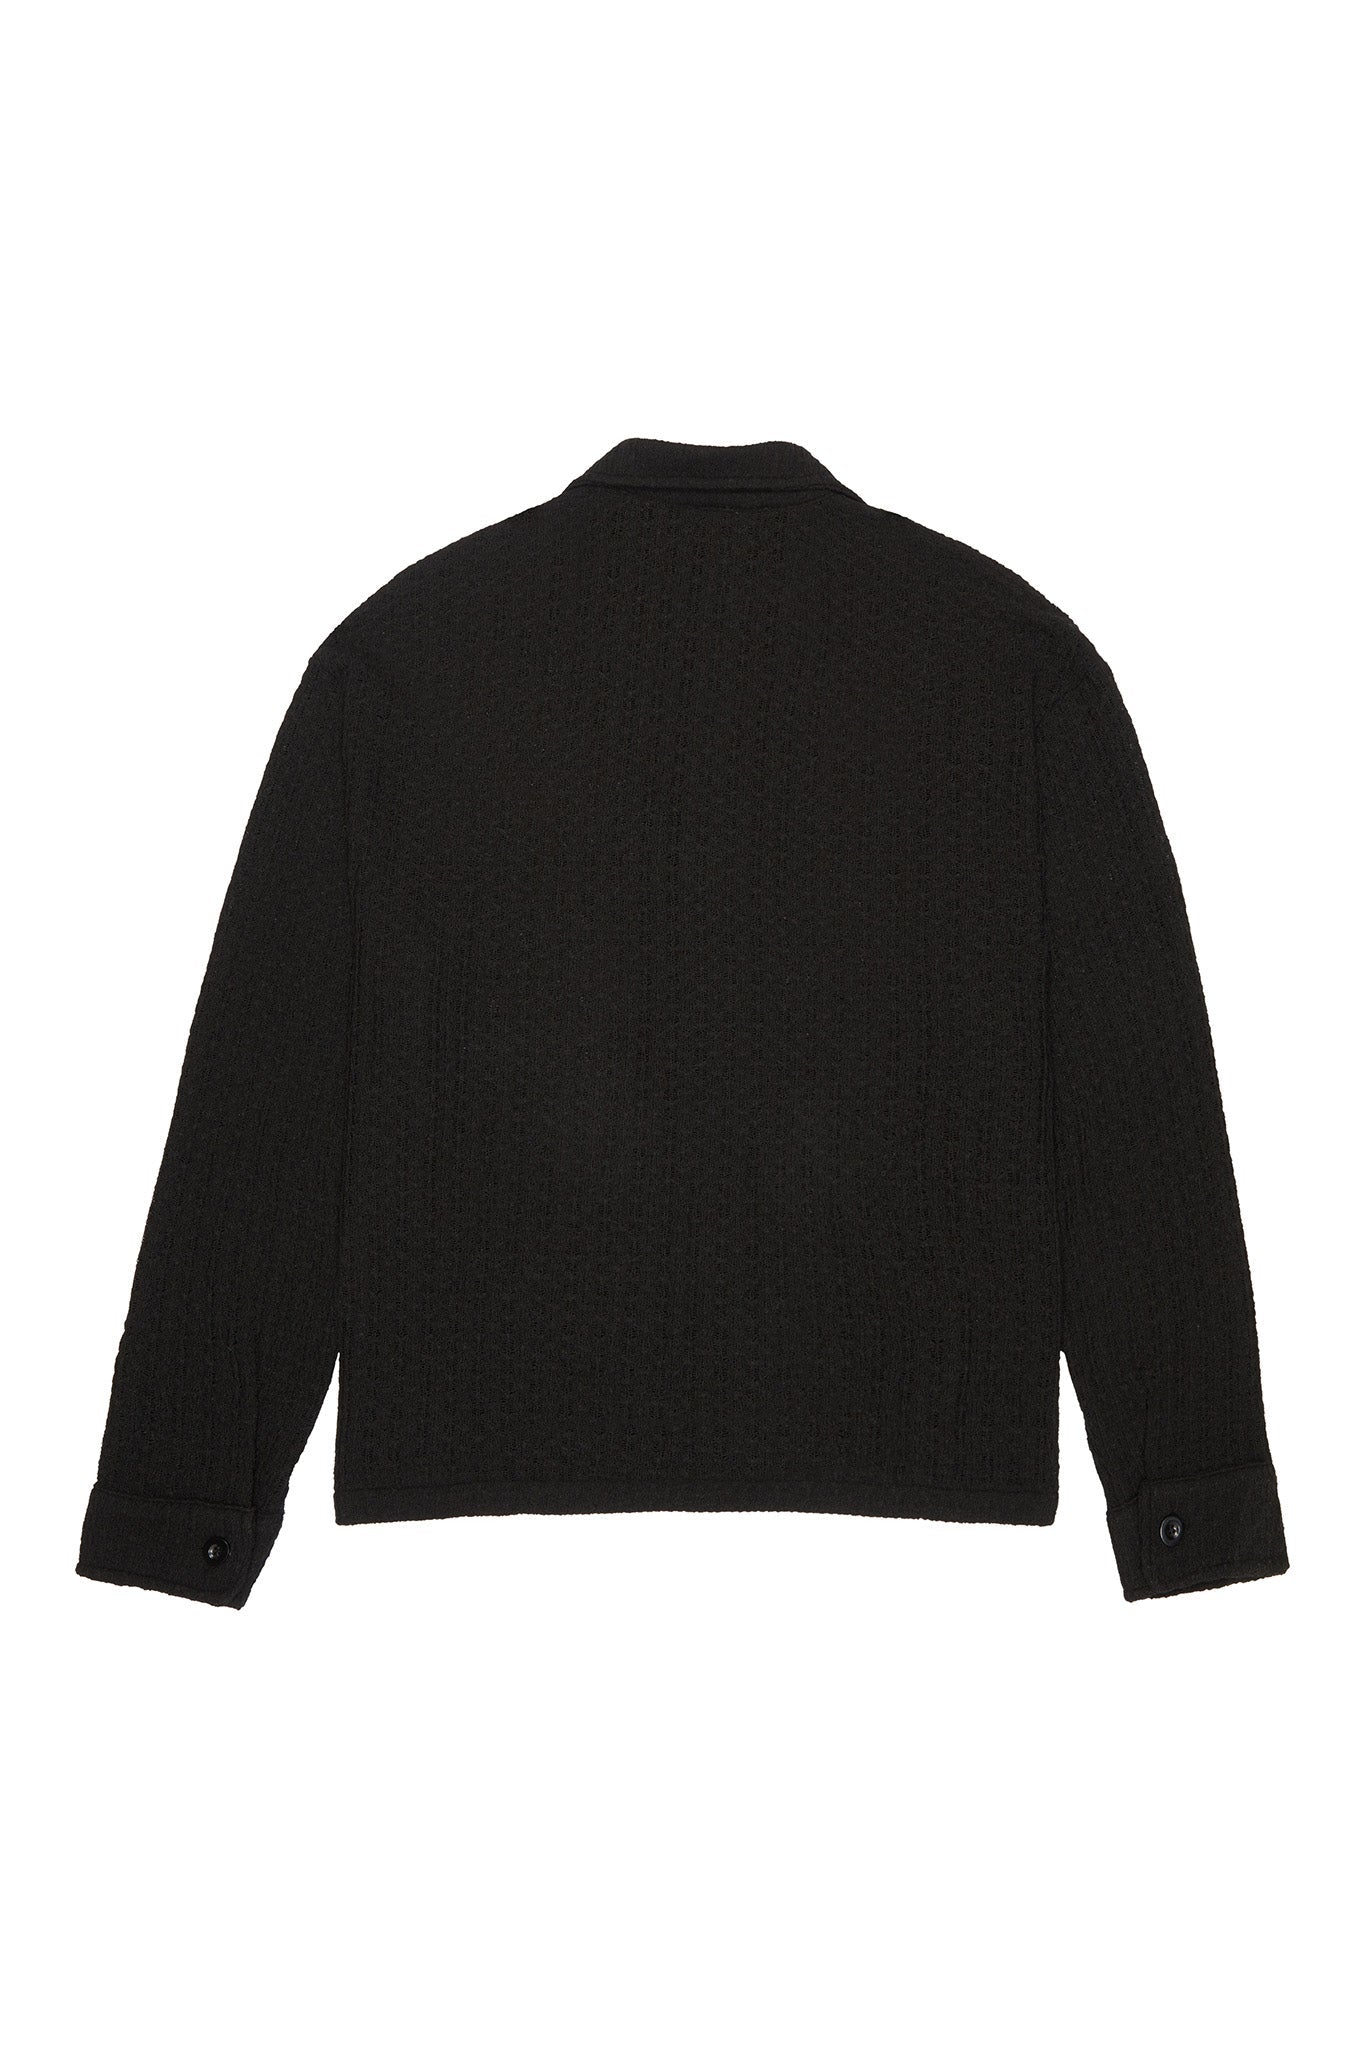 about---blank.comlong sleeve knitted shirt black